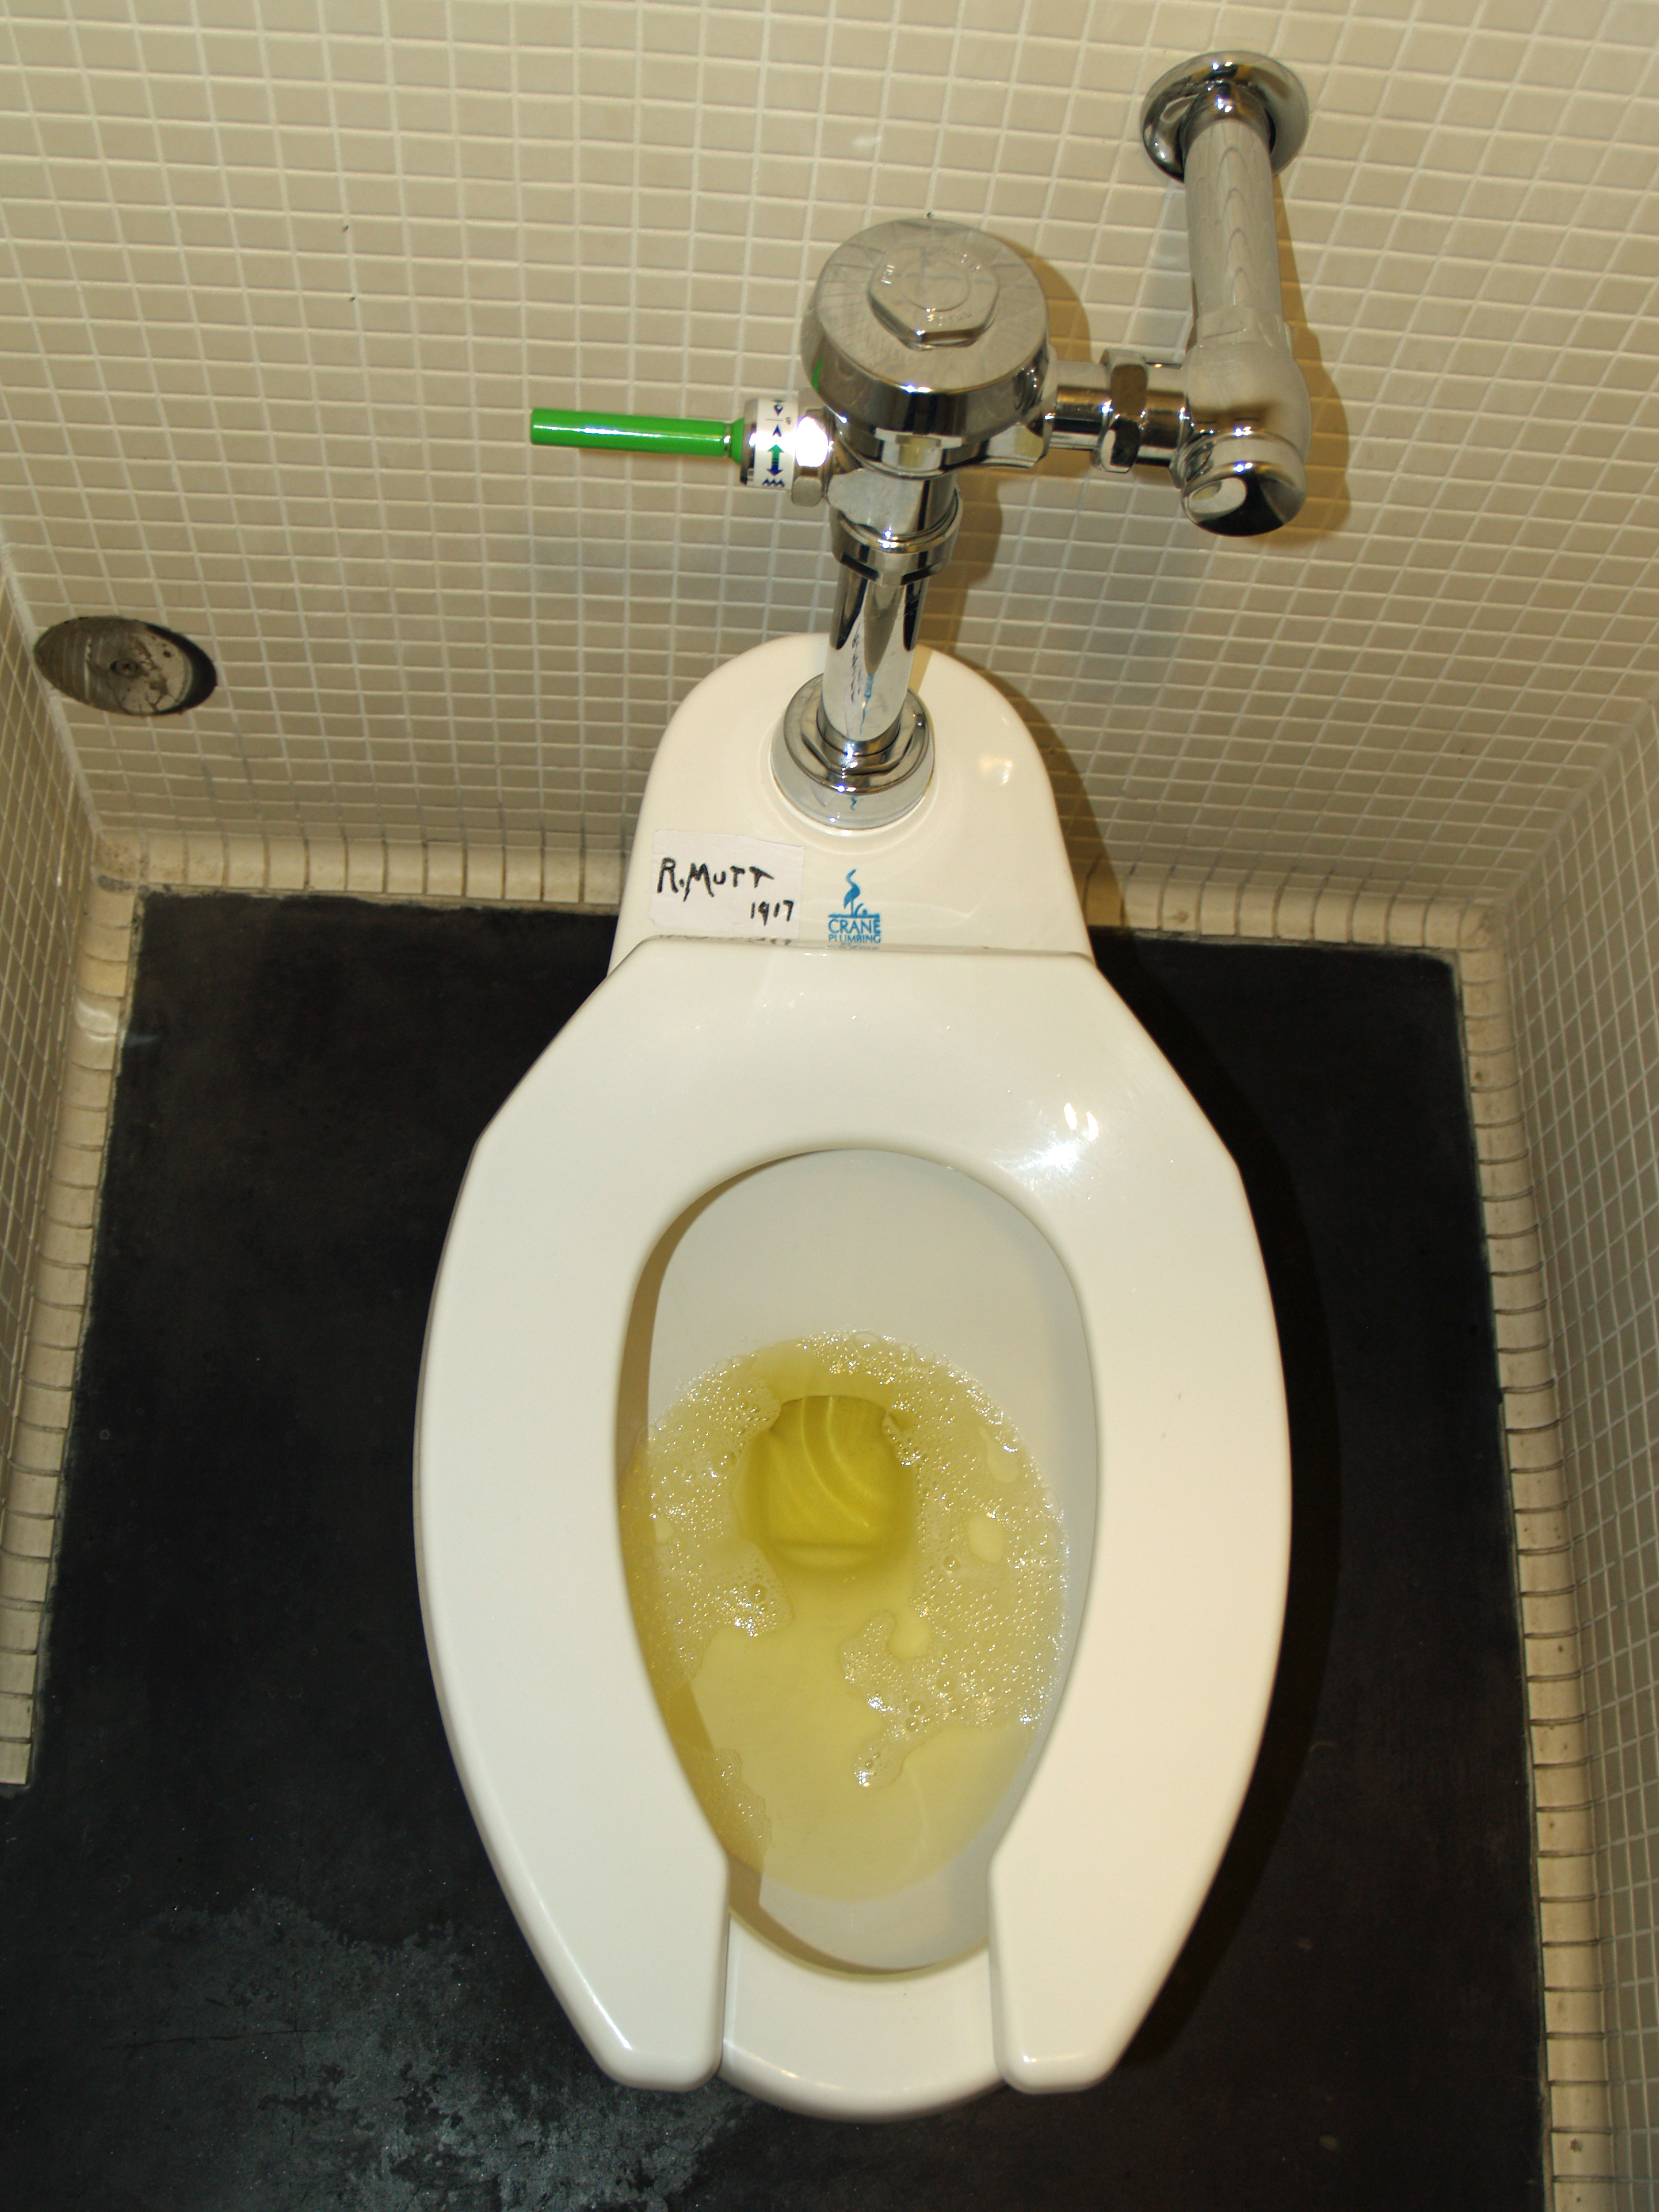 Urine_in_a_toilet_at_the_Denver_Museum_of_Contemporary_Art.JPG